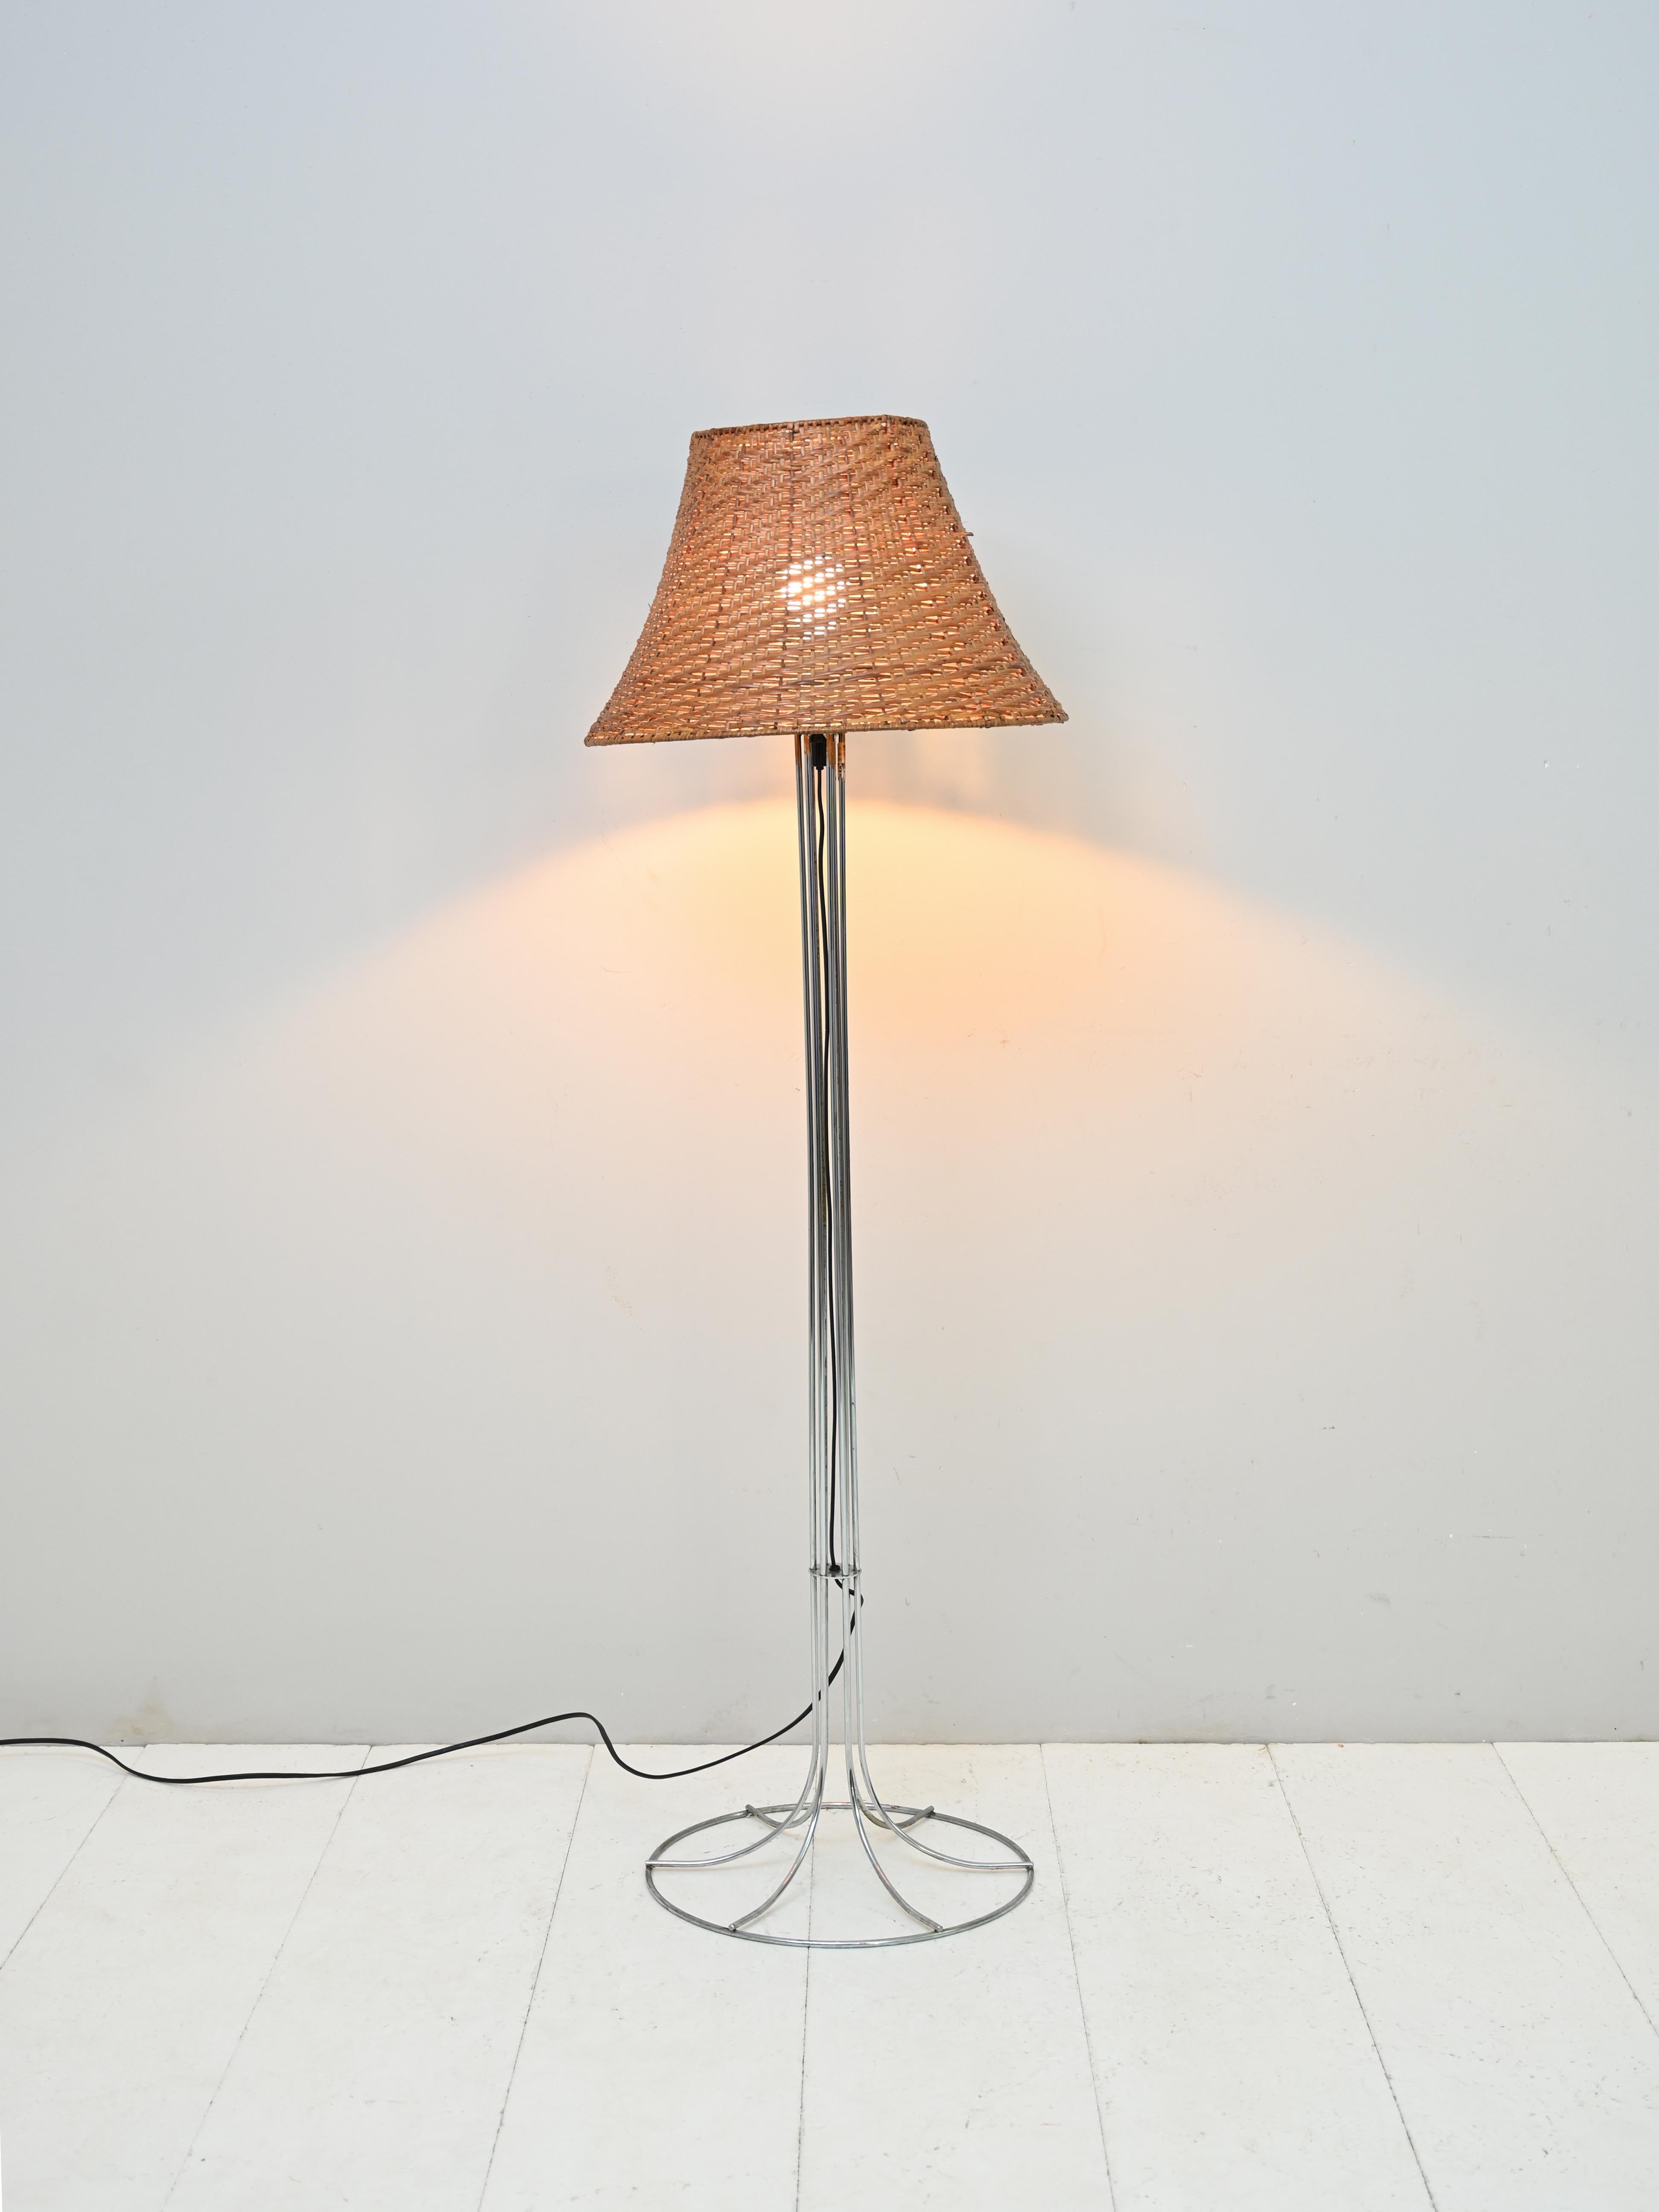 1960s vintage floor lamp.

A vintage Scandinavian lamp with a metal base and a woven rattan lampshade.

A modern design piece that creates warm and diffused lighting in the room.

The structure consists of bent metal slats.

In good condition. The